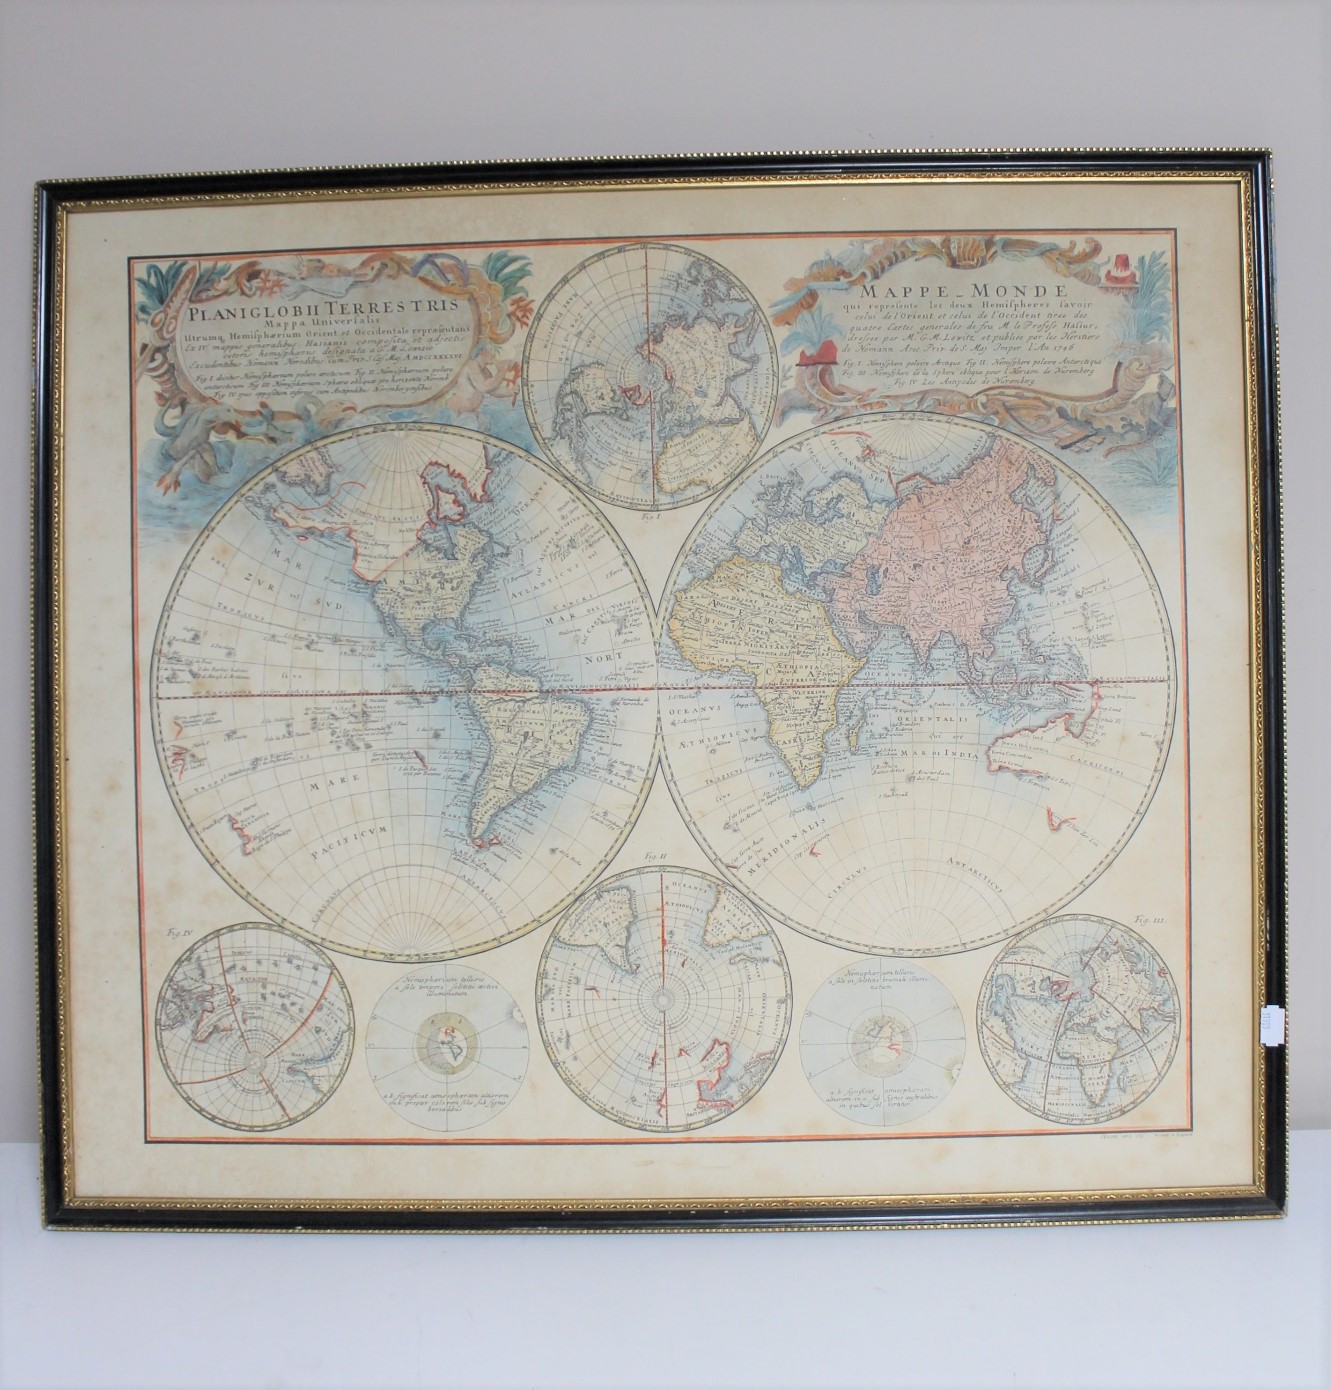 A 20th century printed antiquarian map of the world